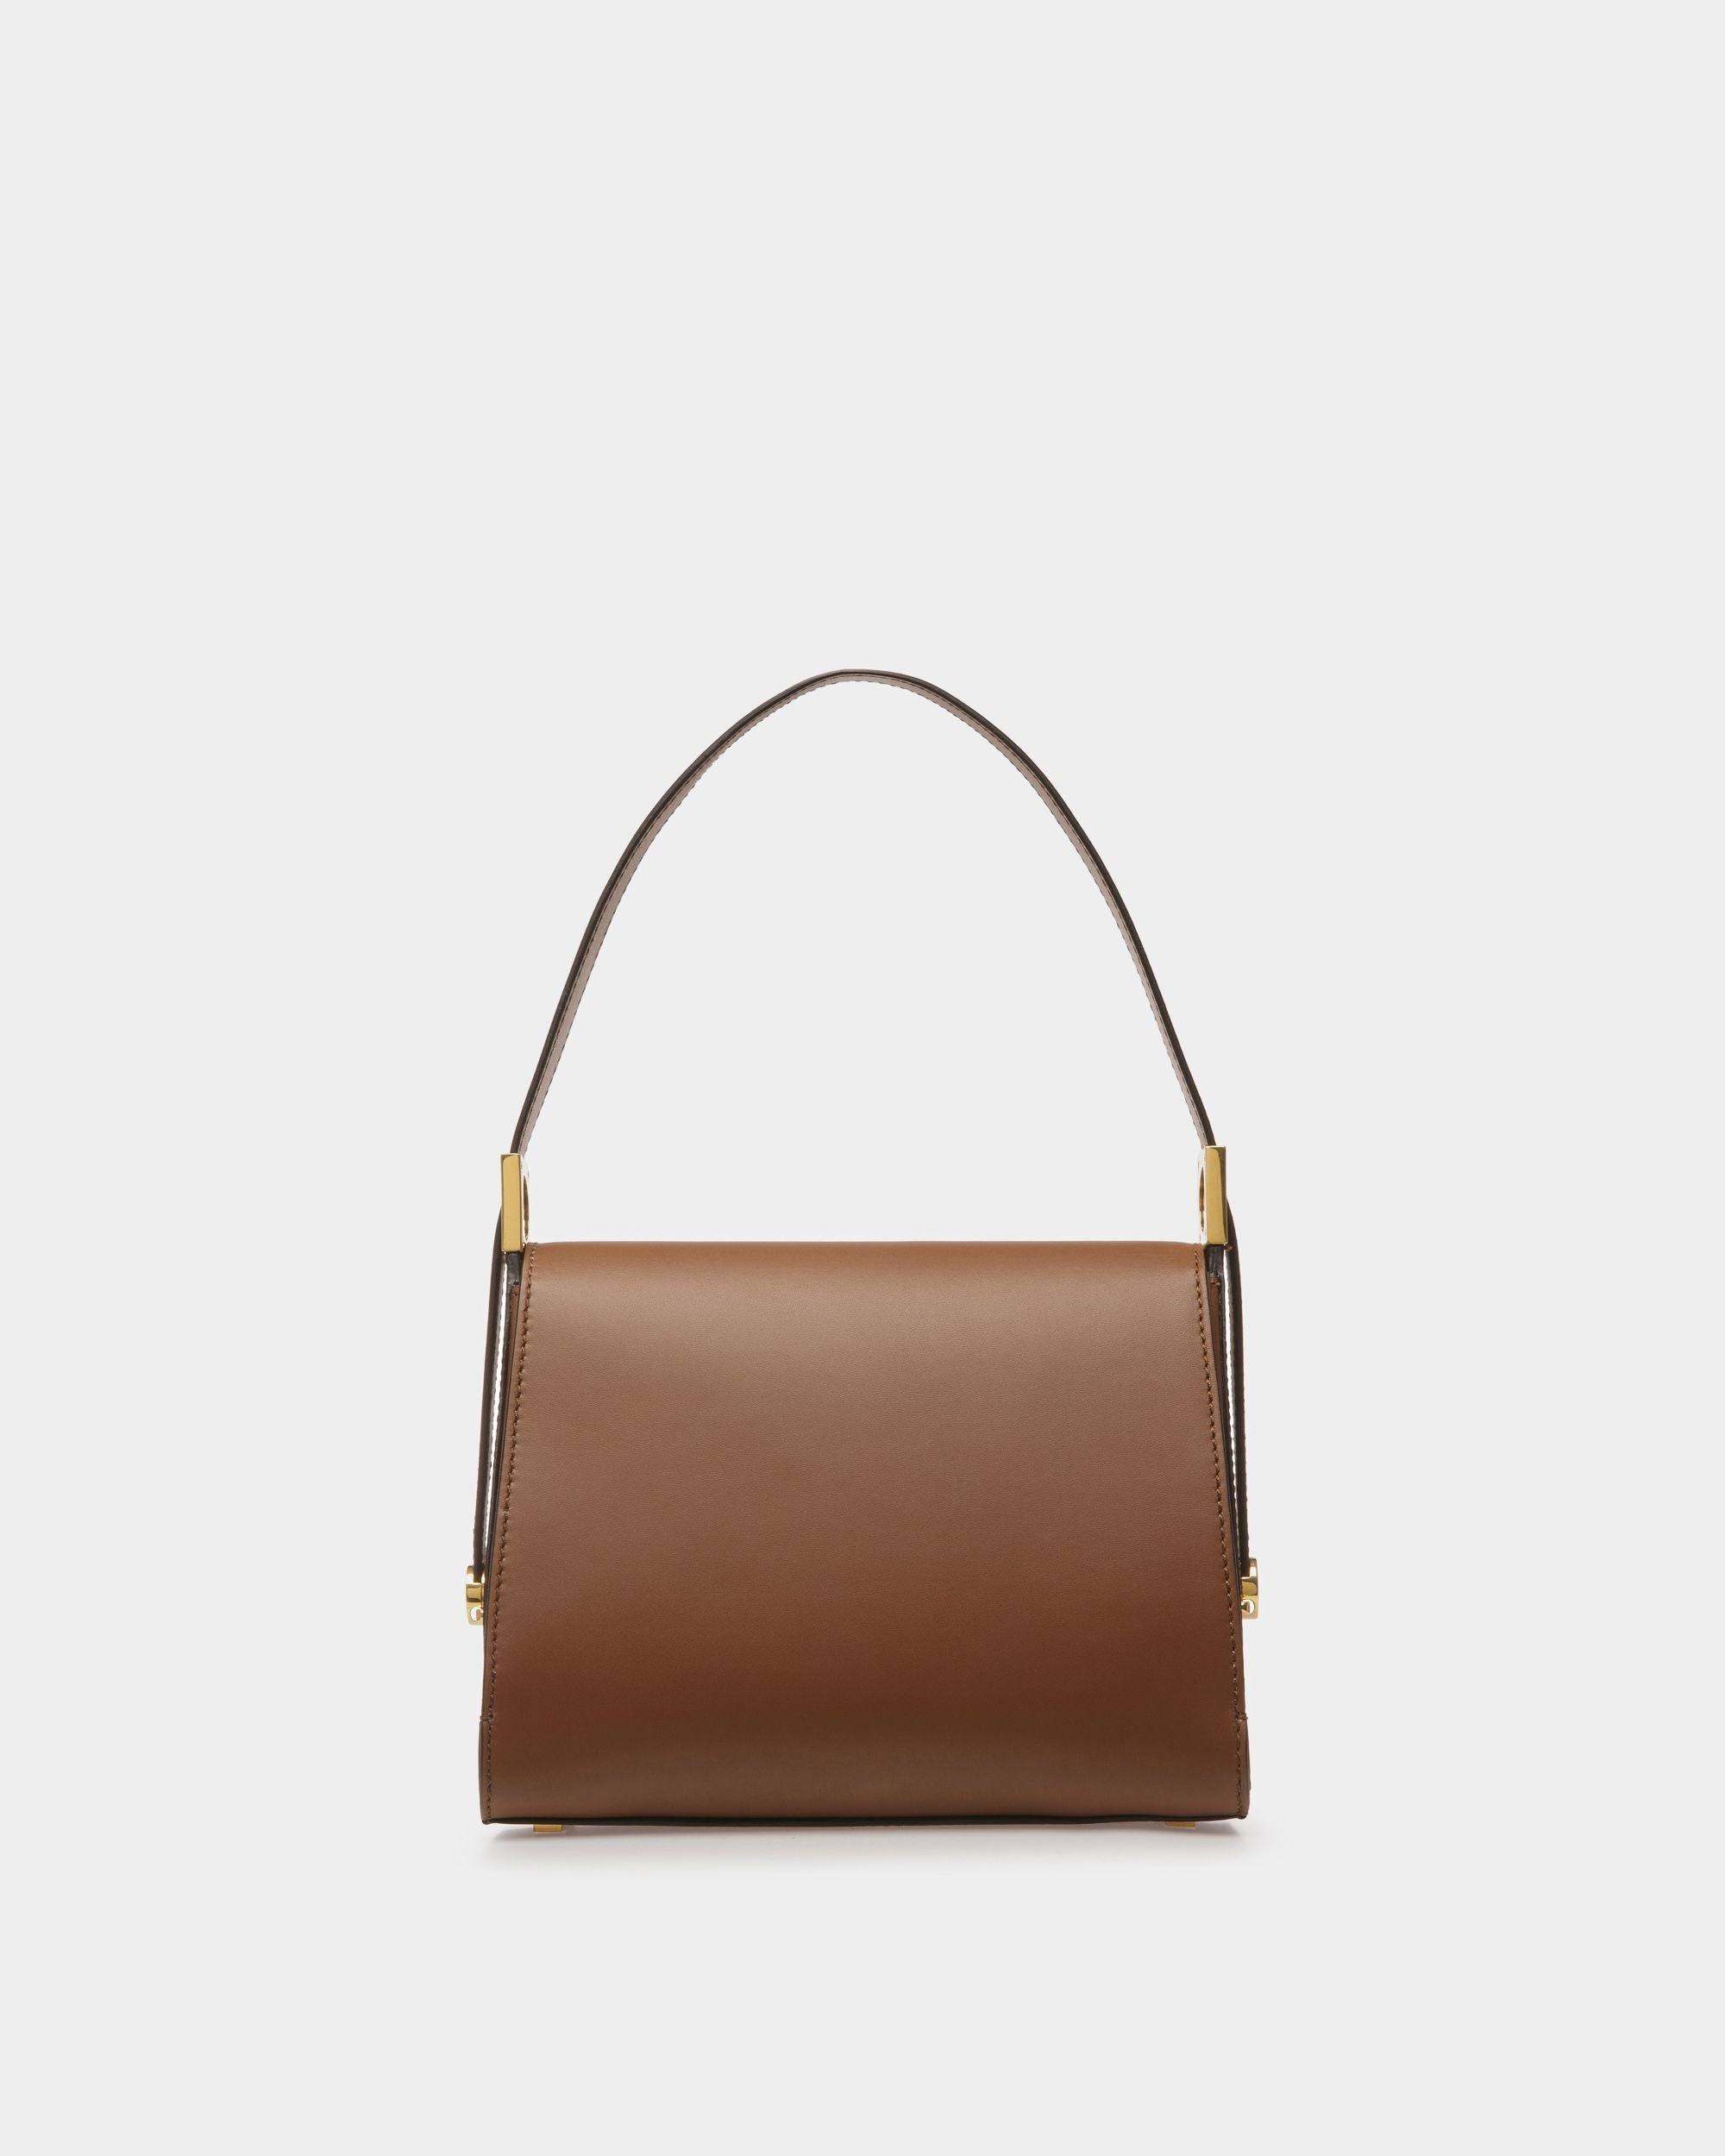 Emblem Trapeze | Women's Top Handle Purse | Brown Leather | Bally | Still Life Back